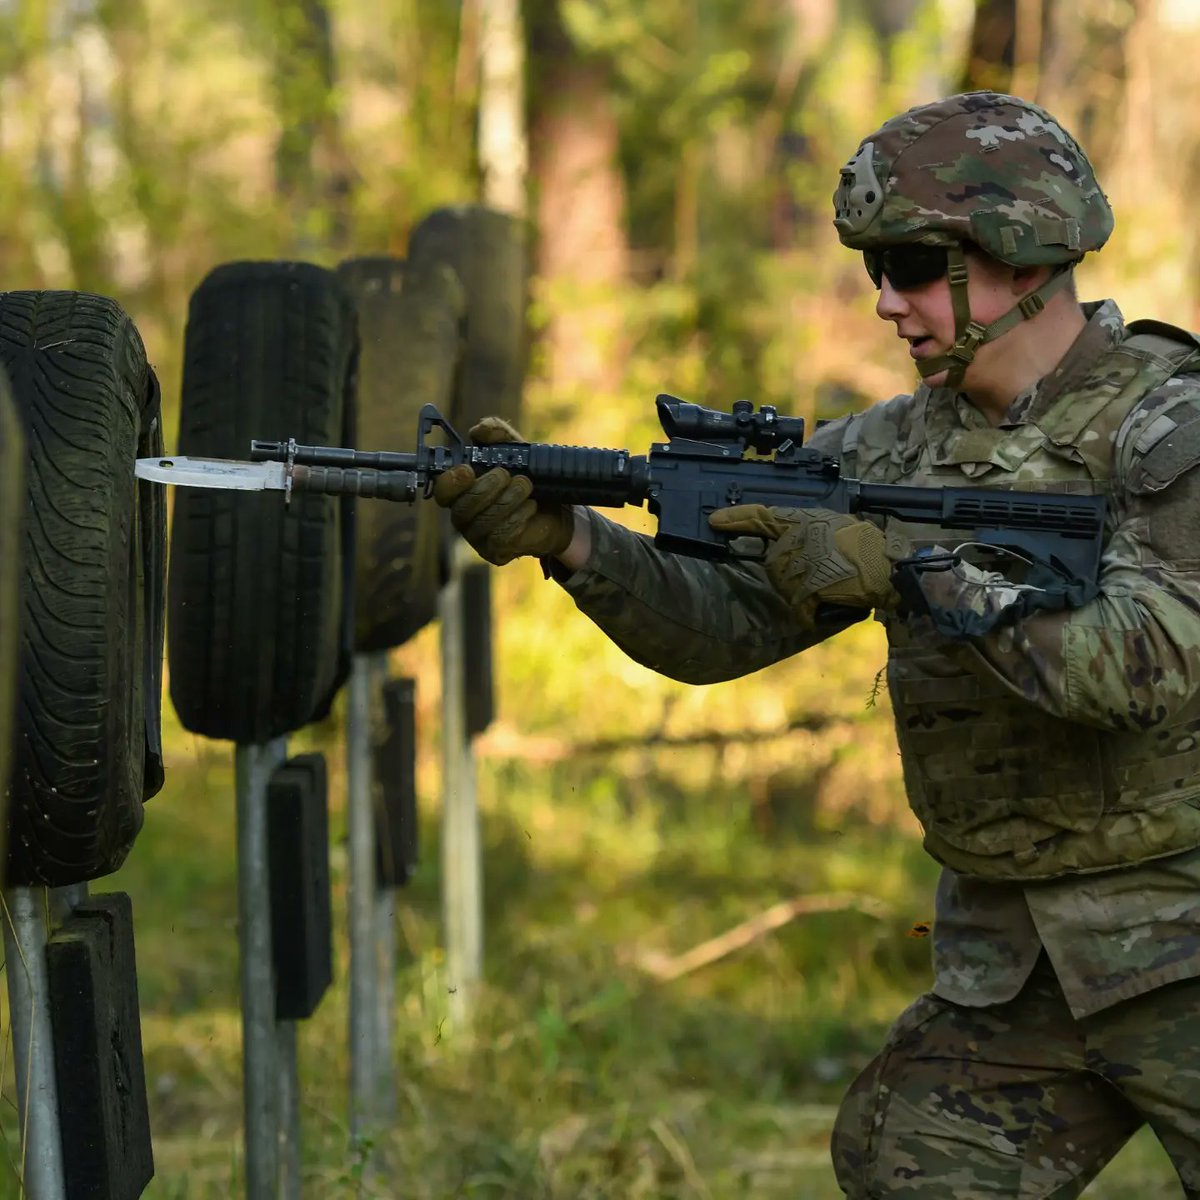 #TrainingTuesday  🪖 1st Squadron (Airborne), 91st Cavalry Regiment tackled the Bayonet Assault Course at @7thATC's Grafenwoehr Training Area earlier this month.

@USArmy📸 by Markus Rauchenberger
  
#TrainedAndReady #beallyoucanbe 

@173rdAbnBde @USArmyEURAF @DeptofDefense